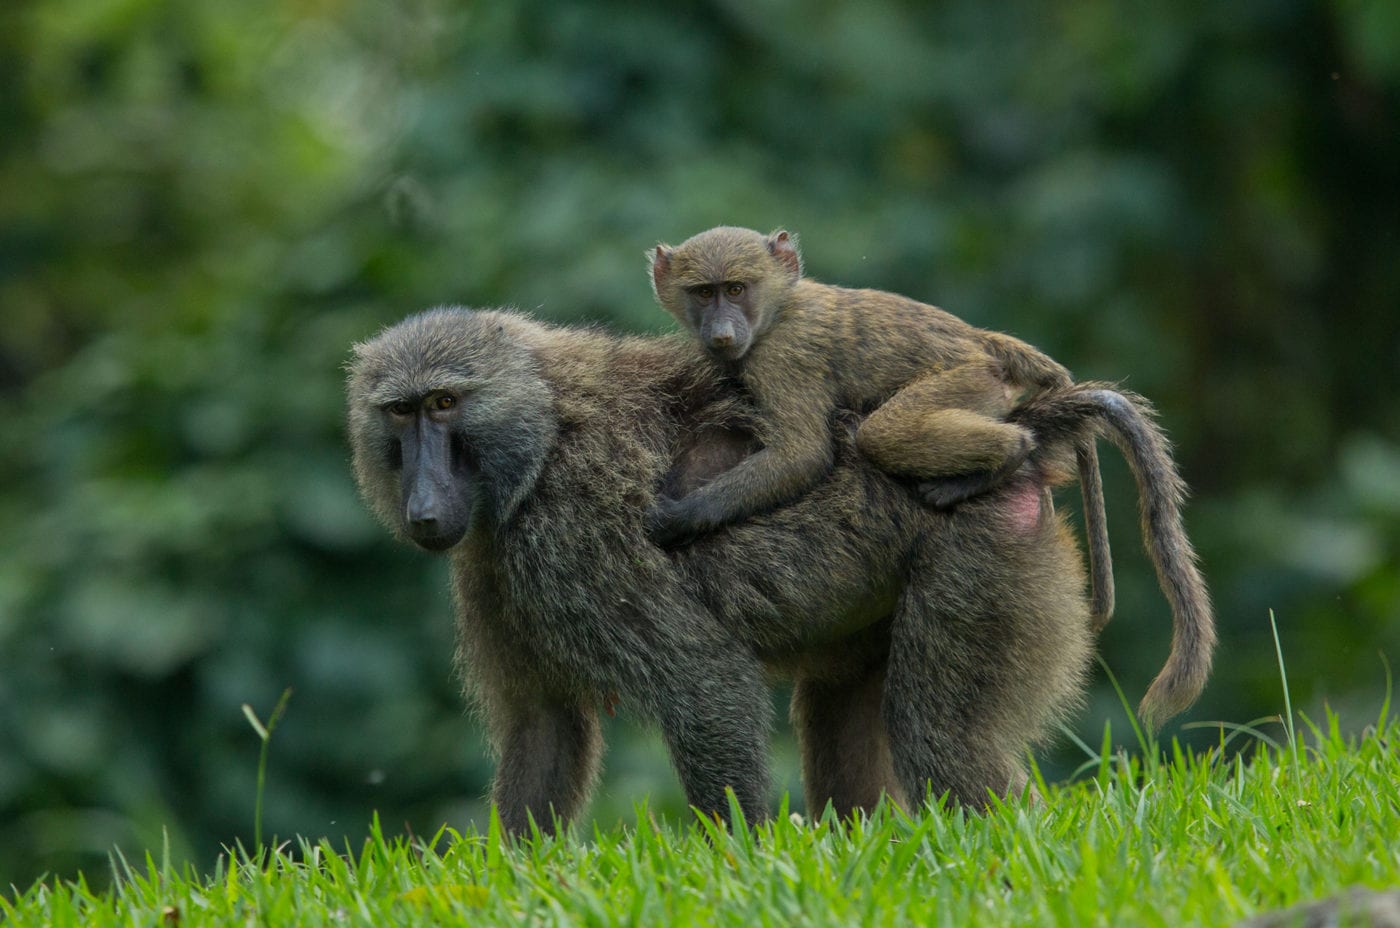 Mother baboon holding baby baboon in the wild